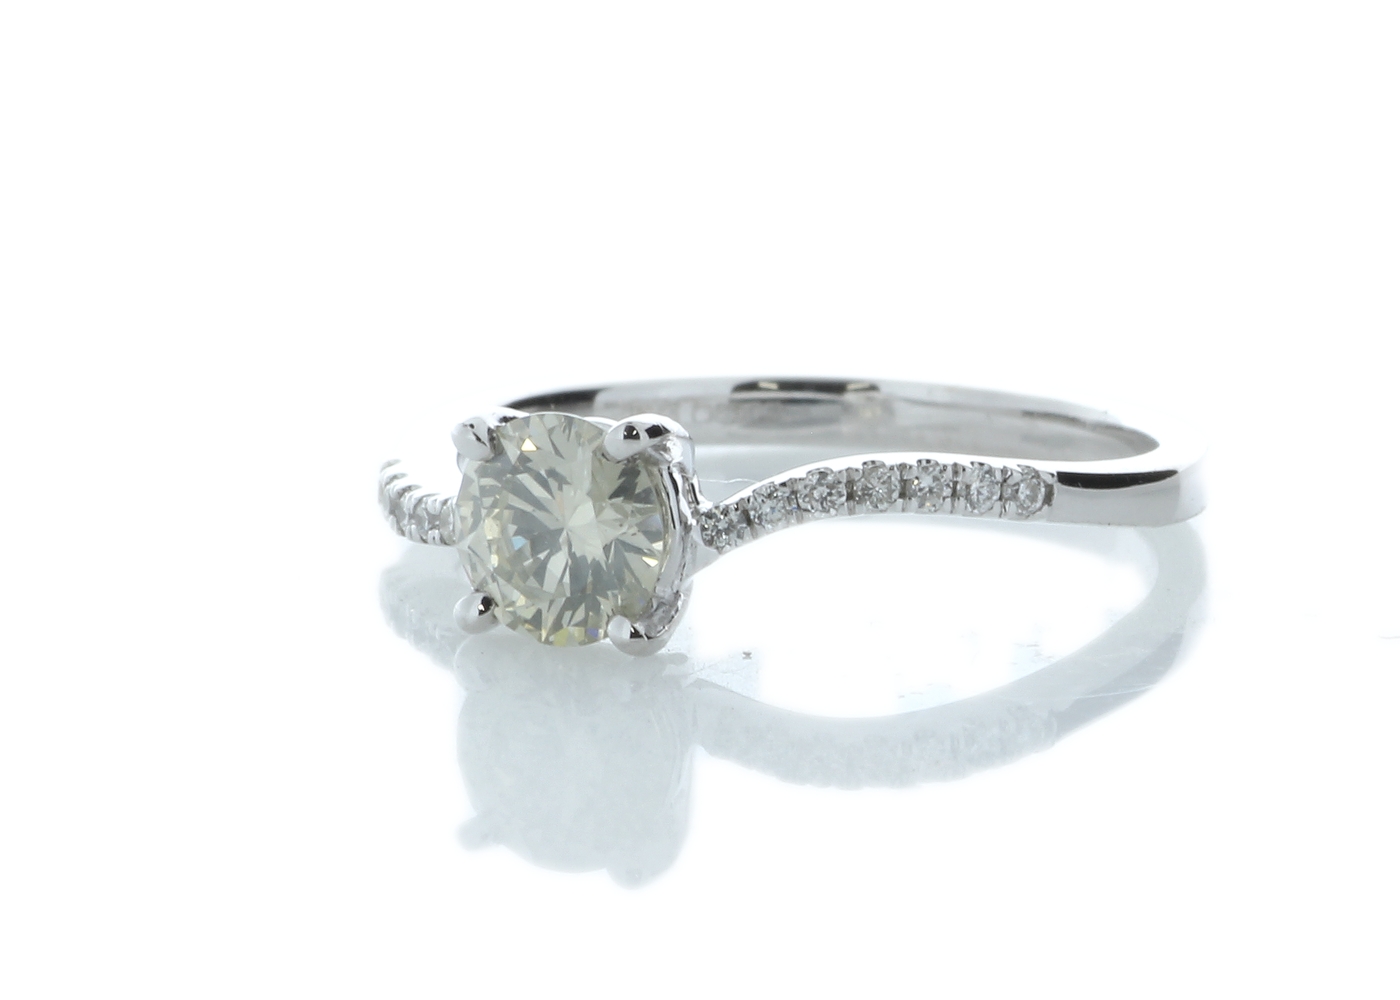 18ct White Gold Single Stone Claw Set With Stone Set Shoulders Diamond Ring (0.60) 0.74 Carats - Image 2 of 5